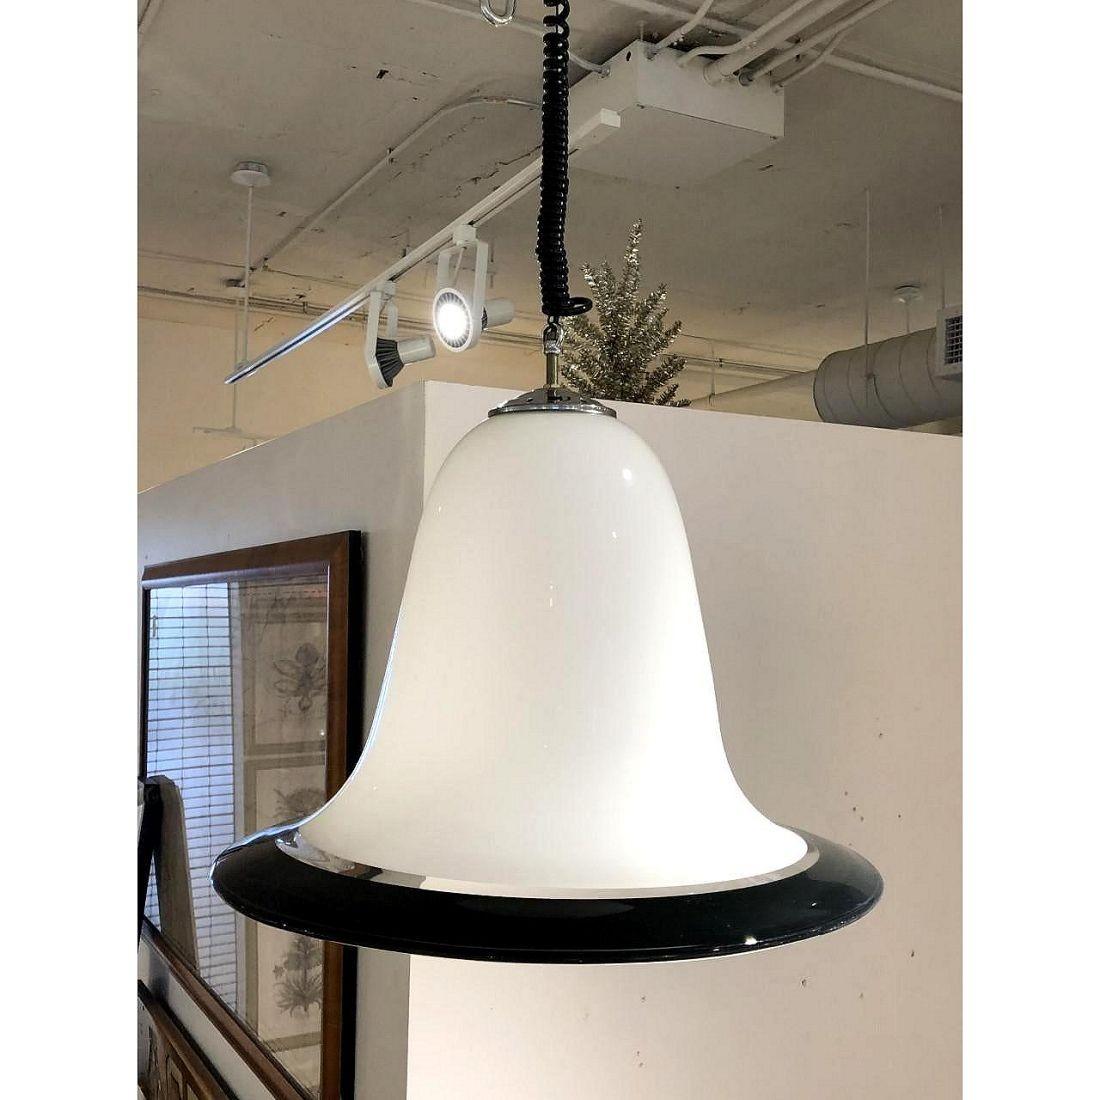 Mid-Century Modern bell shade pendant chandelier by Seguso Italy 1960s.
The Murano ceiling light is white, translucent with black accent.
The chandelier has chrome fitting on top of the Murano glass bell shade.
Black spiral cording attaches to